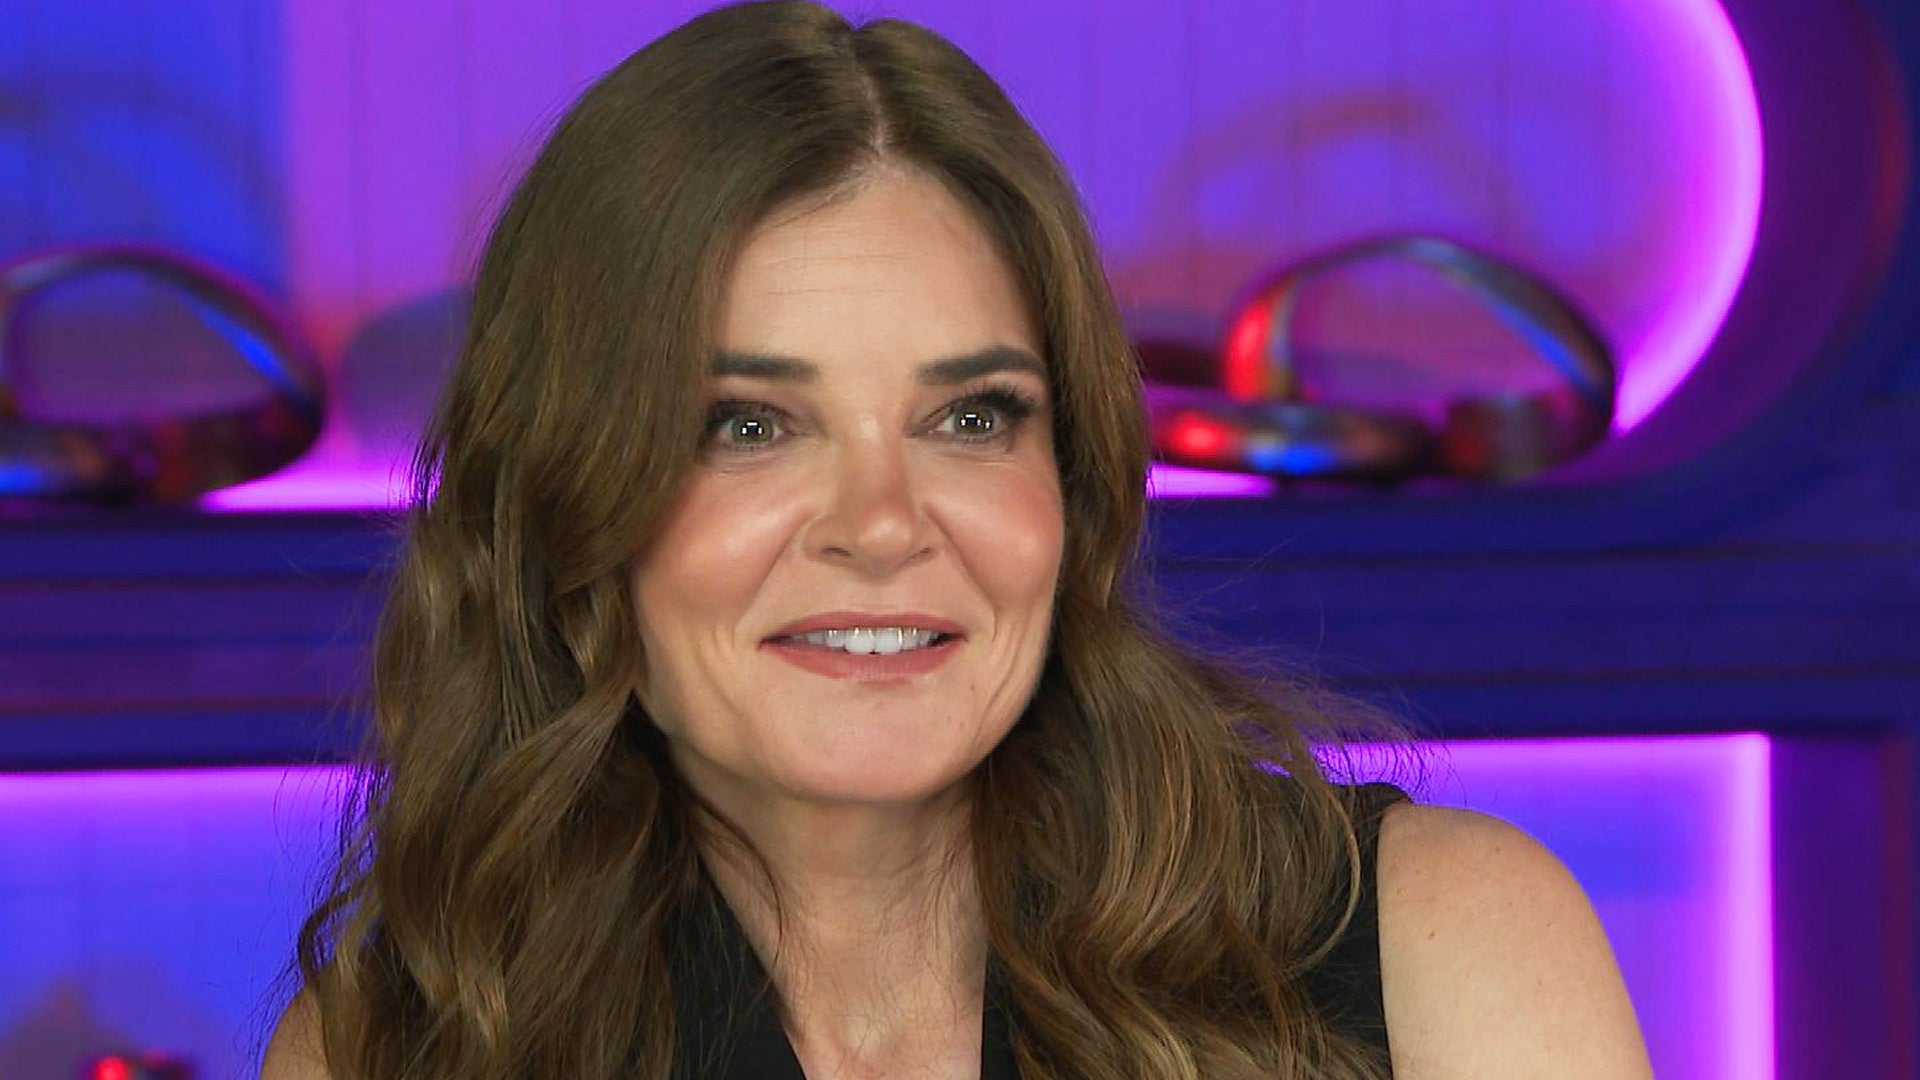 Betsy Brandt Reveals ‘Breaking Bad’ Secret as She Brings ‘The Bad Orphan’ to Lifetime (Exclusive)